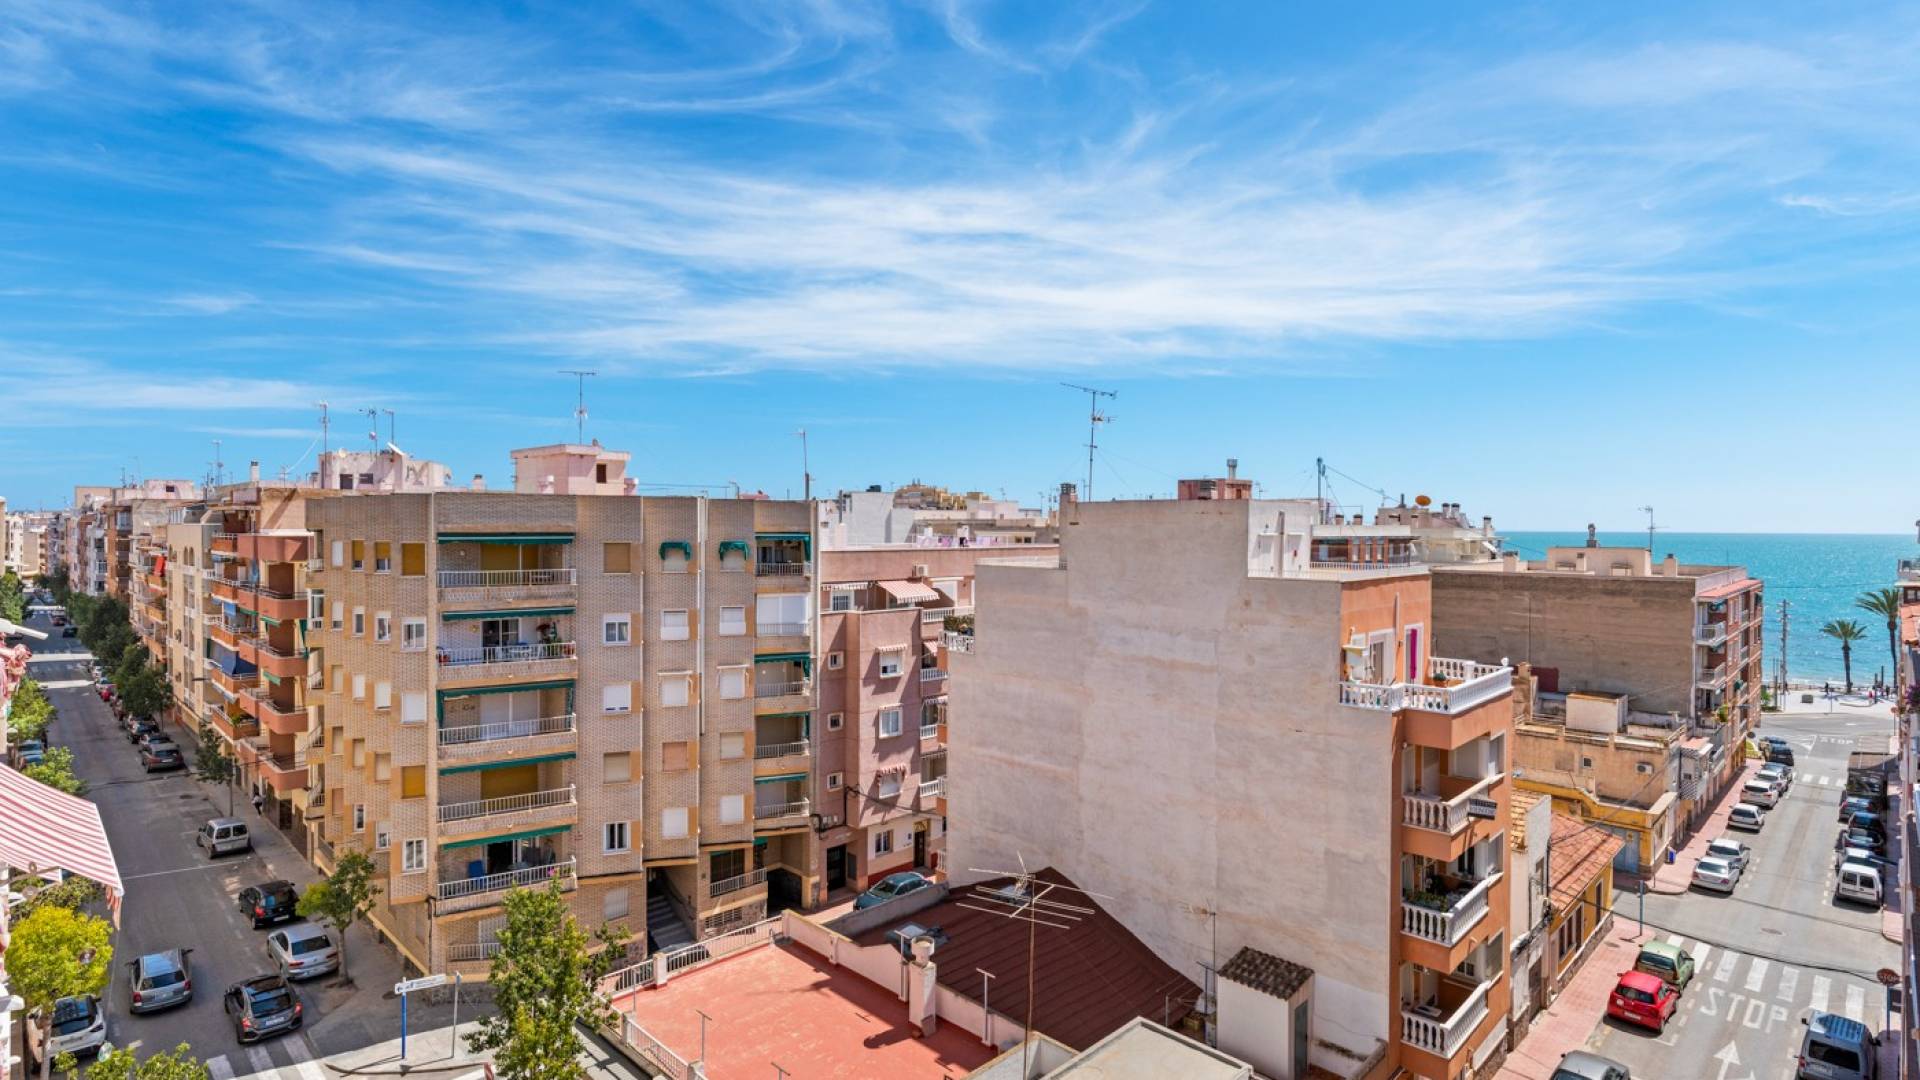 Second hand - Penthouse - Torrevieja - Playa del Cura